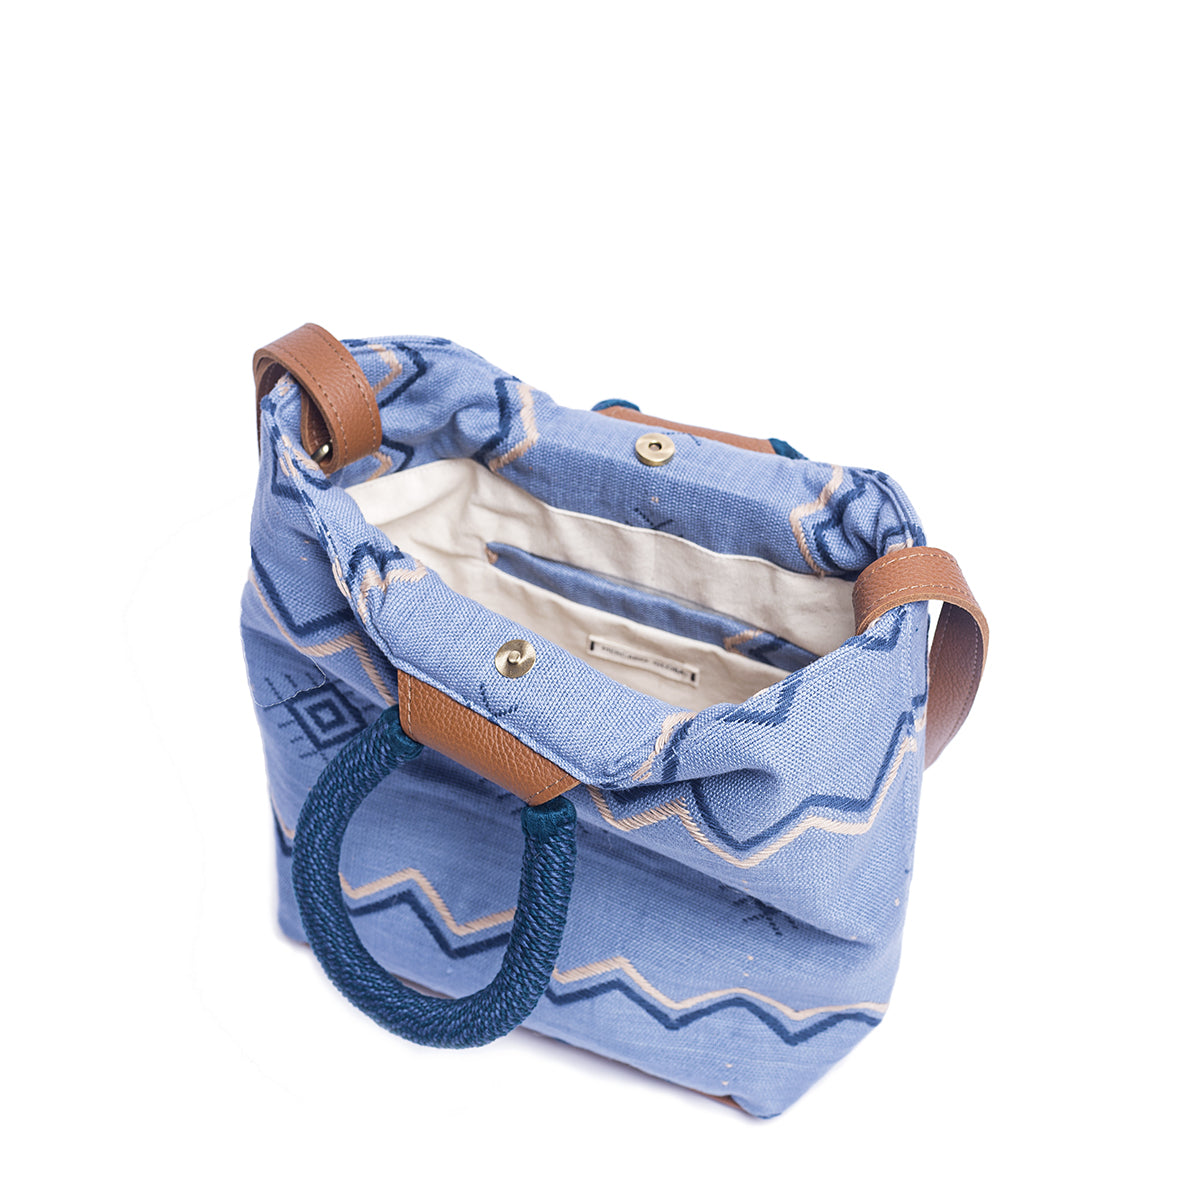 A top side view of the hand woven artisan Dalila Midi Tote in Mountain Blue. The interior has a white lining, an interior pocket, and a magnetic clasp.